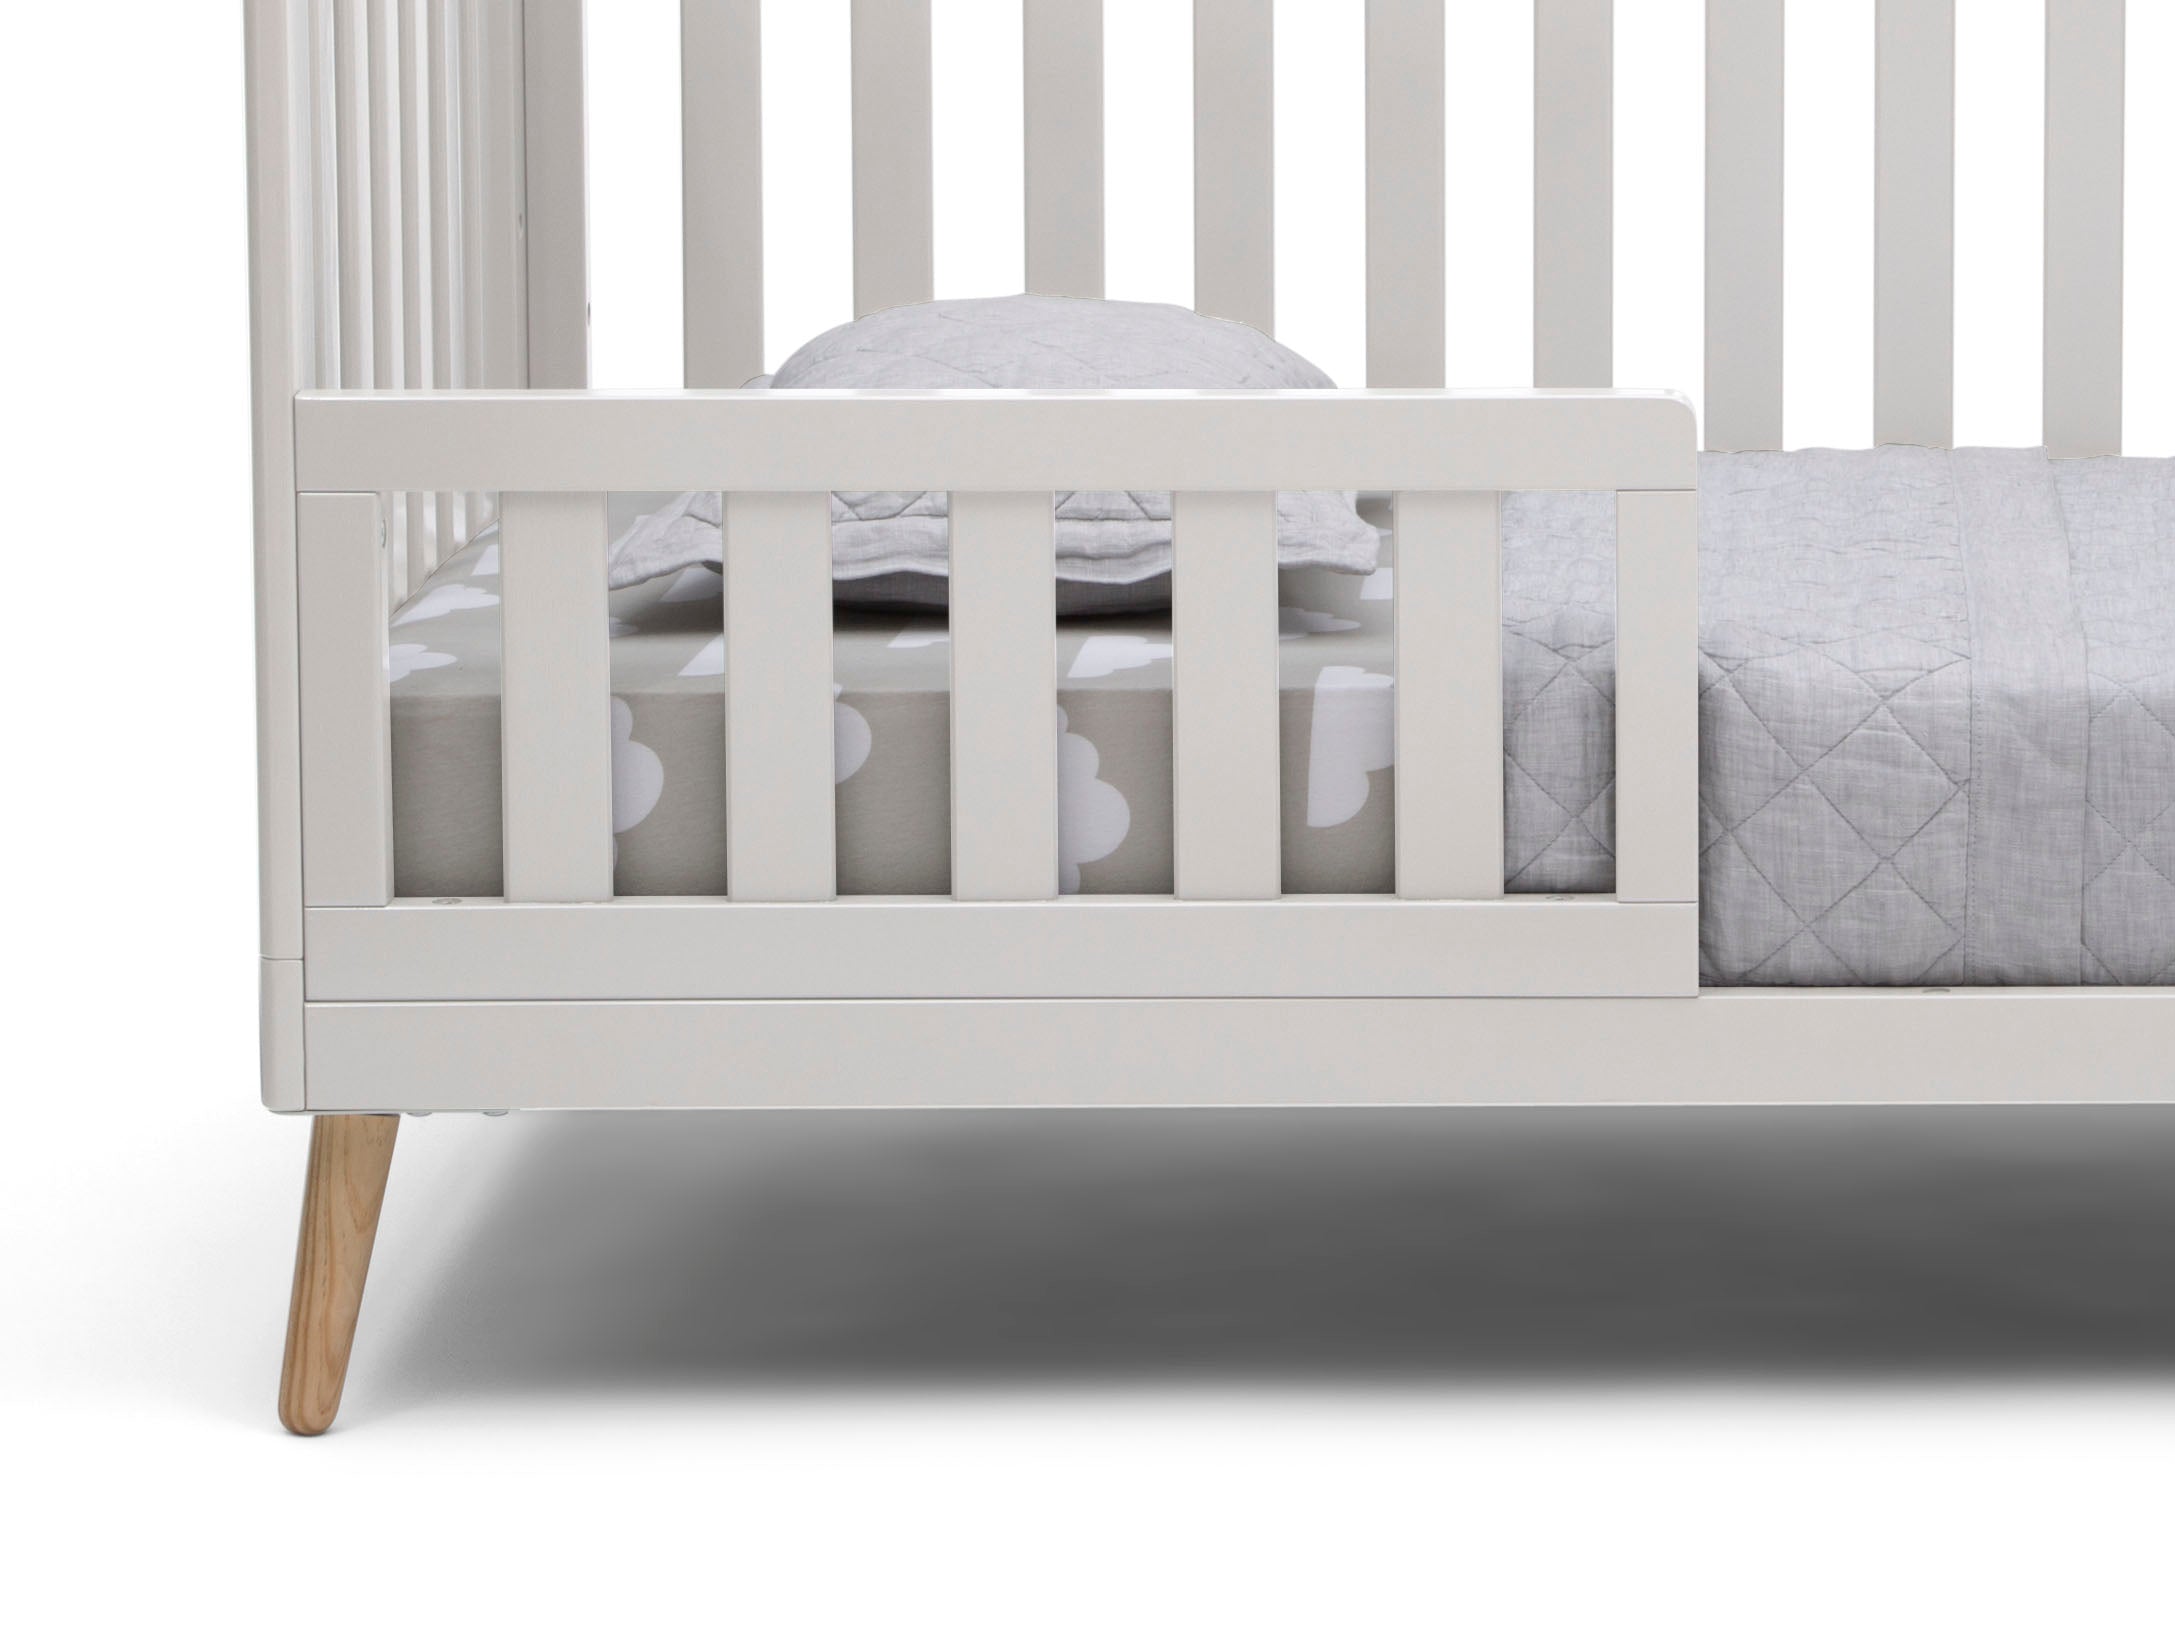 baby cribs for sale under 100